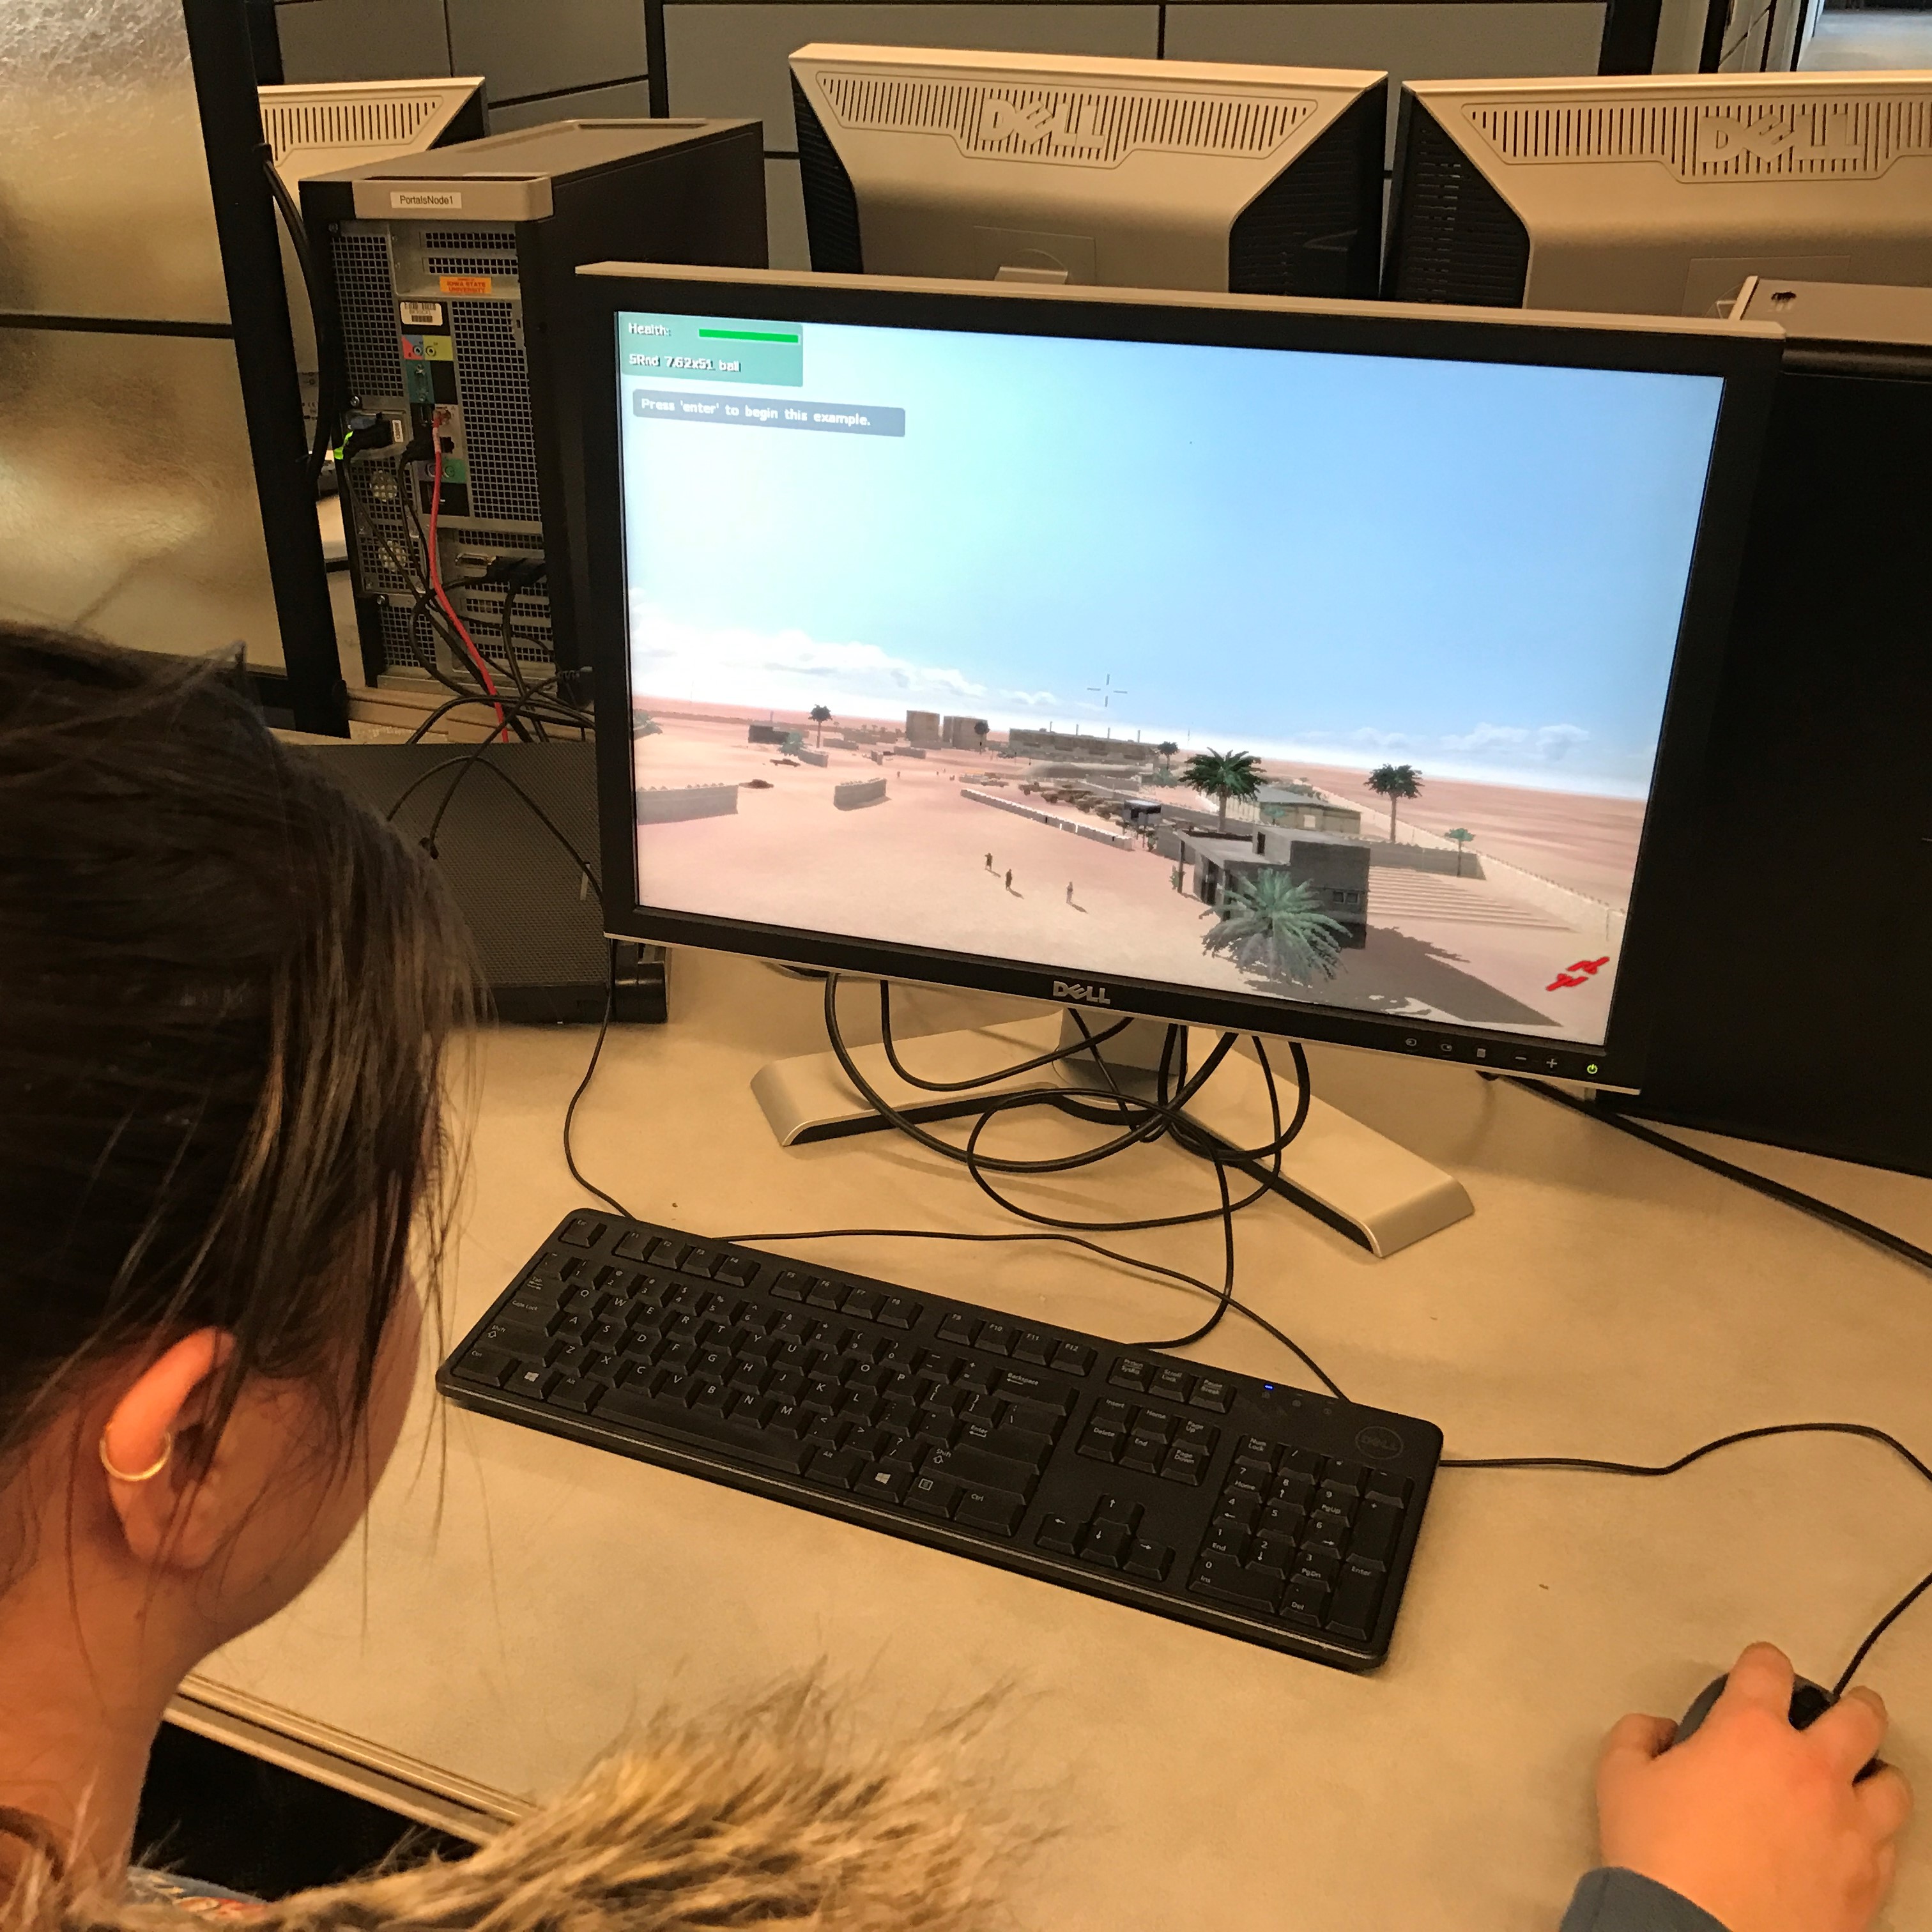 Kaitlyn interacting with the serious game environment used during player testing.